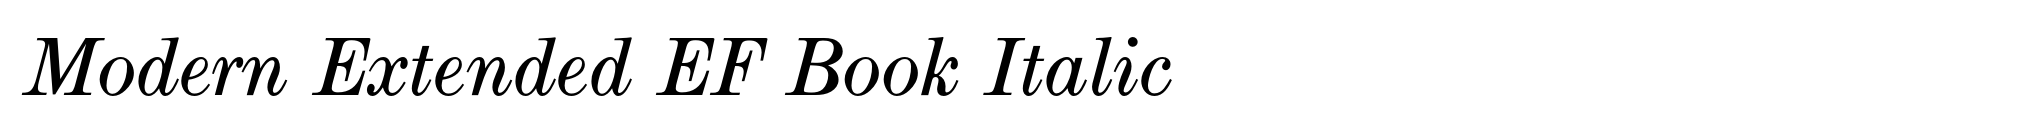 Modern Extended EF Book Italic image